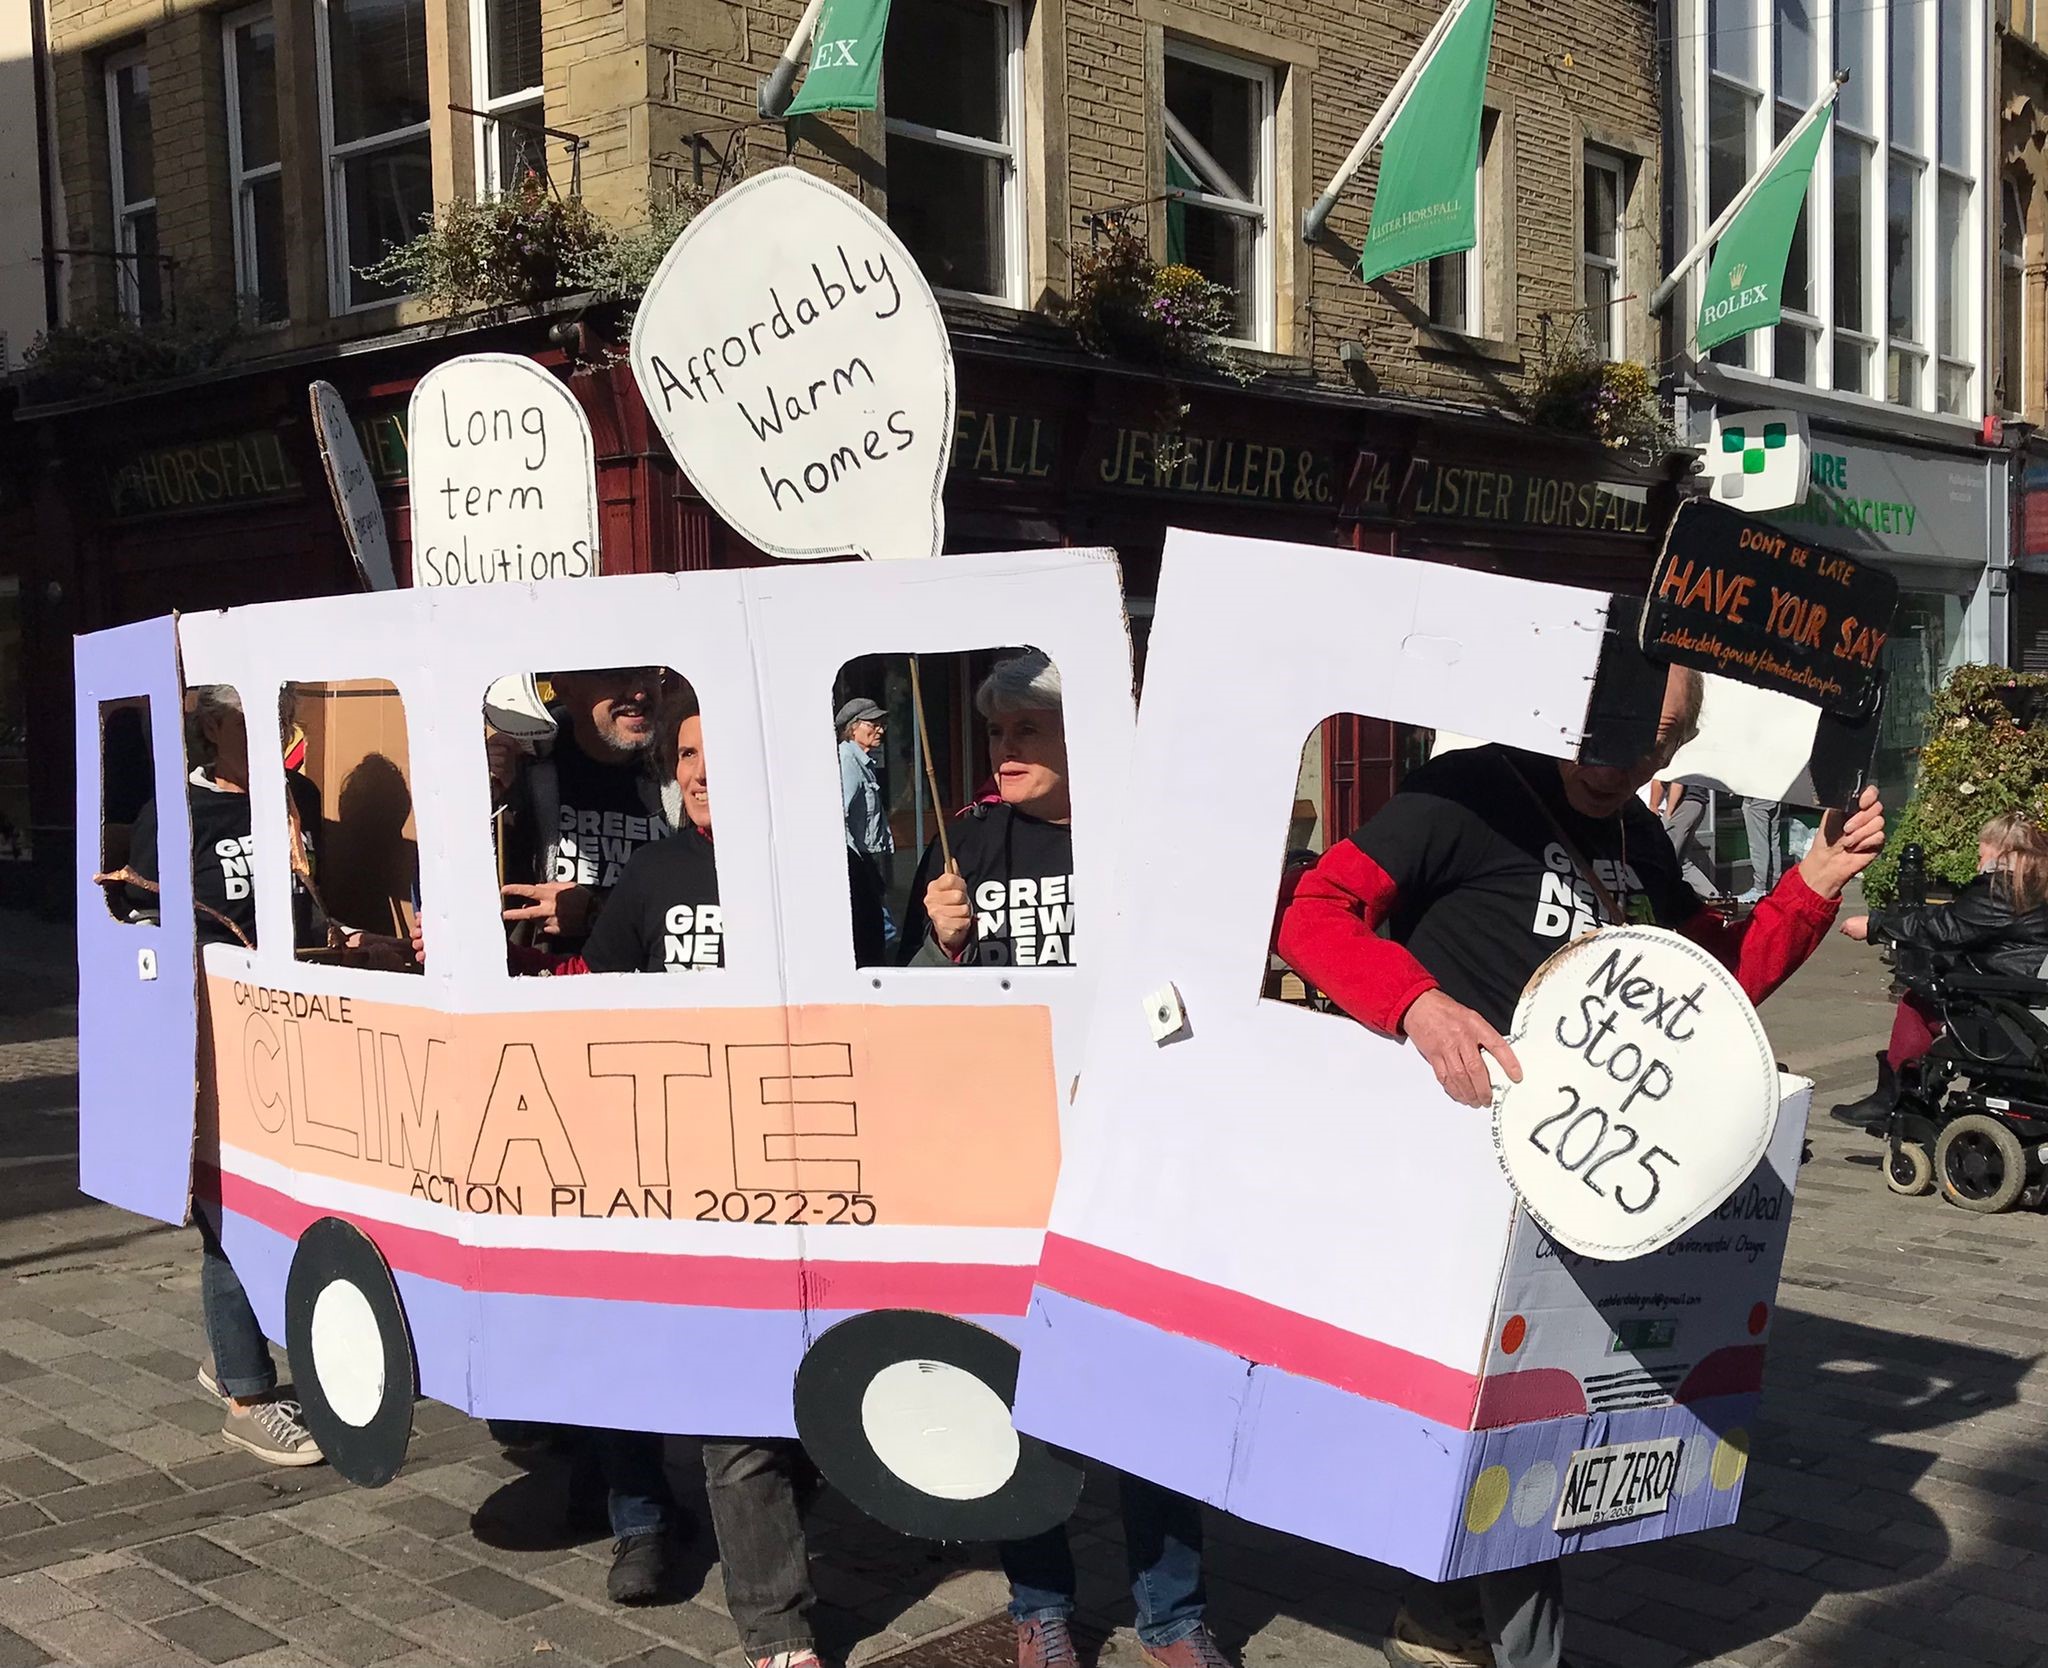 A group walking along carrying a bus made of card and climate slogans